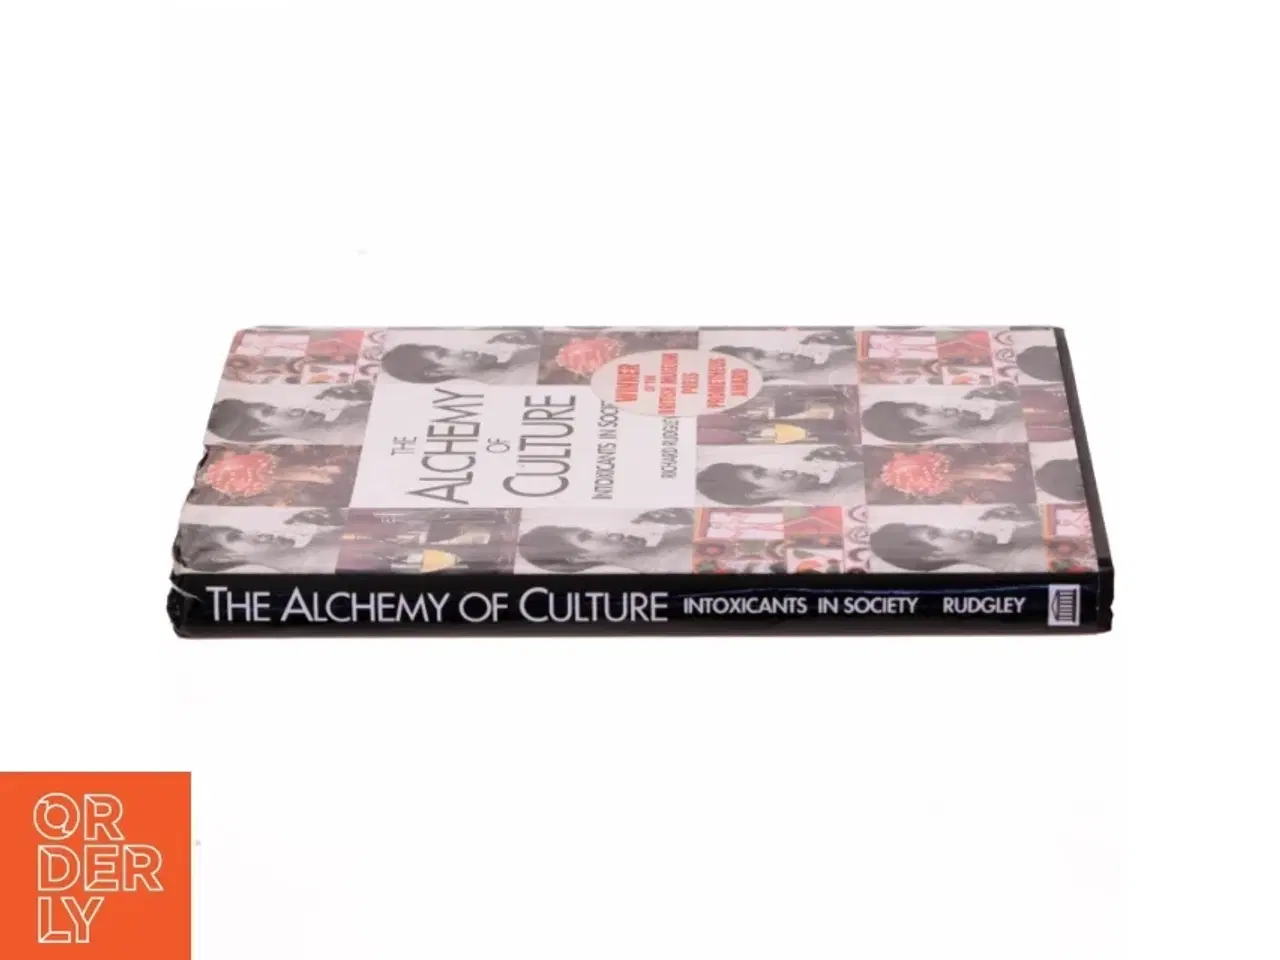 Billede 2 - The alchemy of culture - Intoxicants in society af Richard Rudgly (bog)